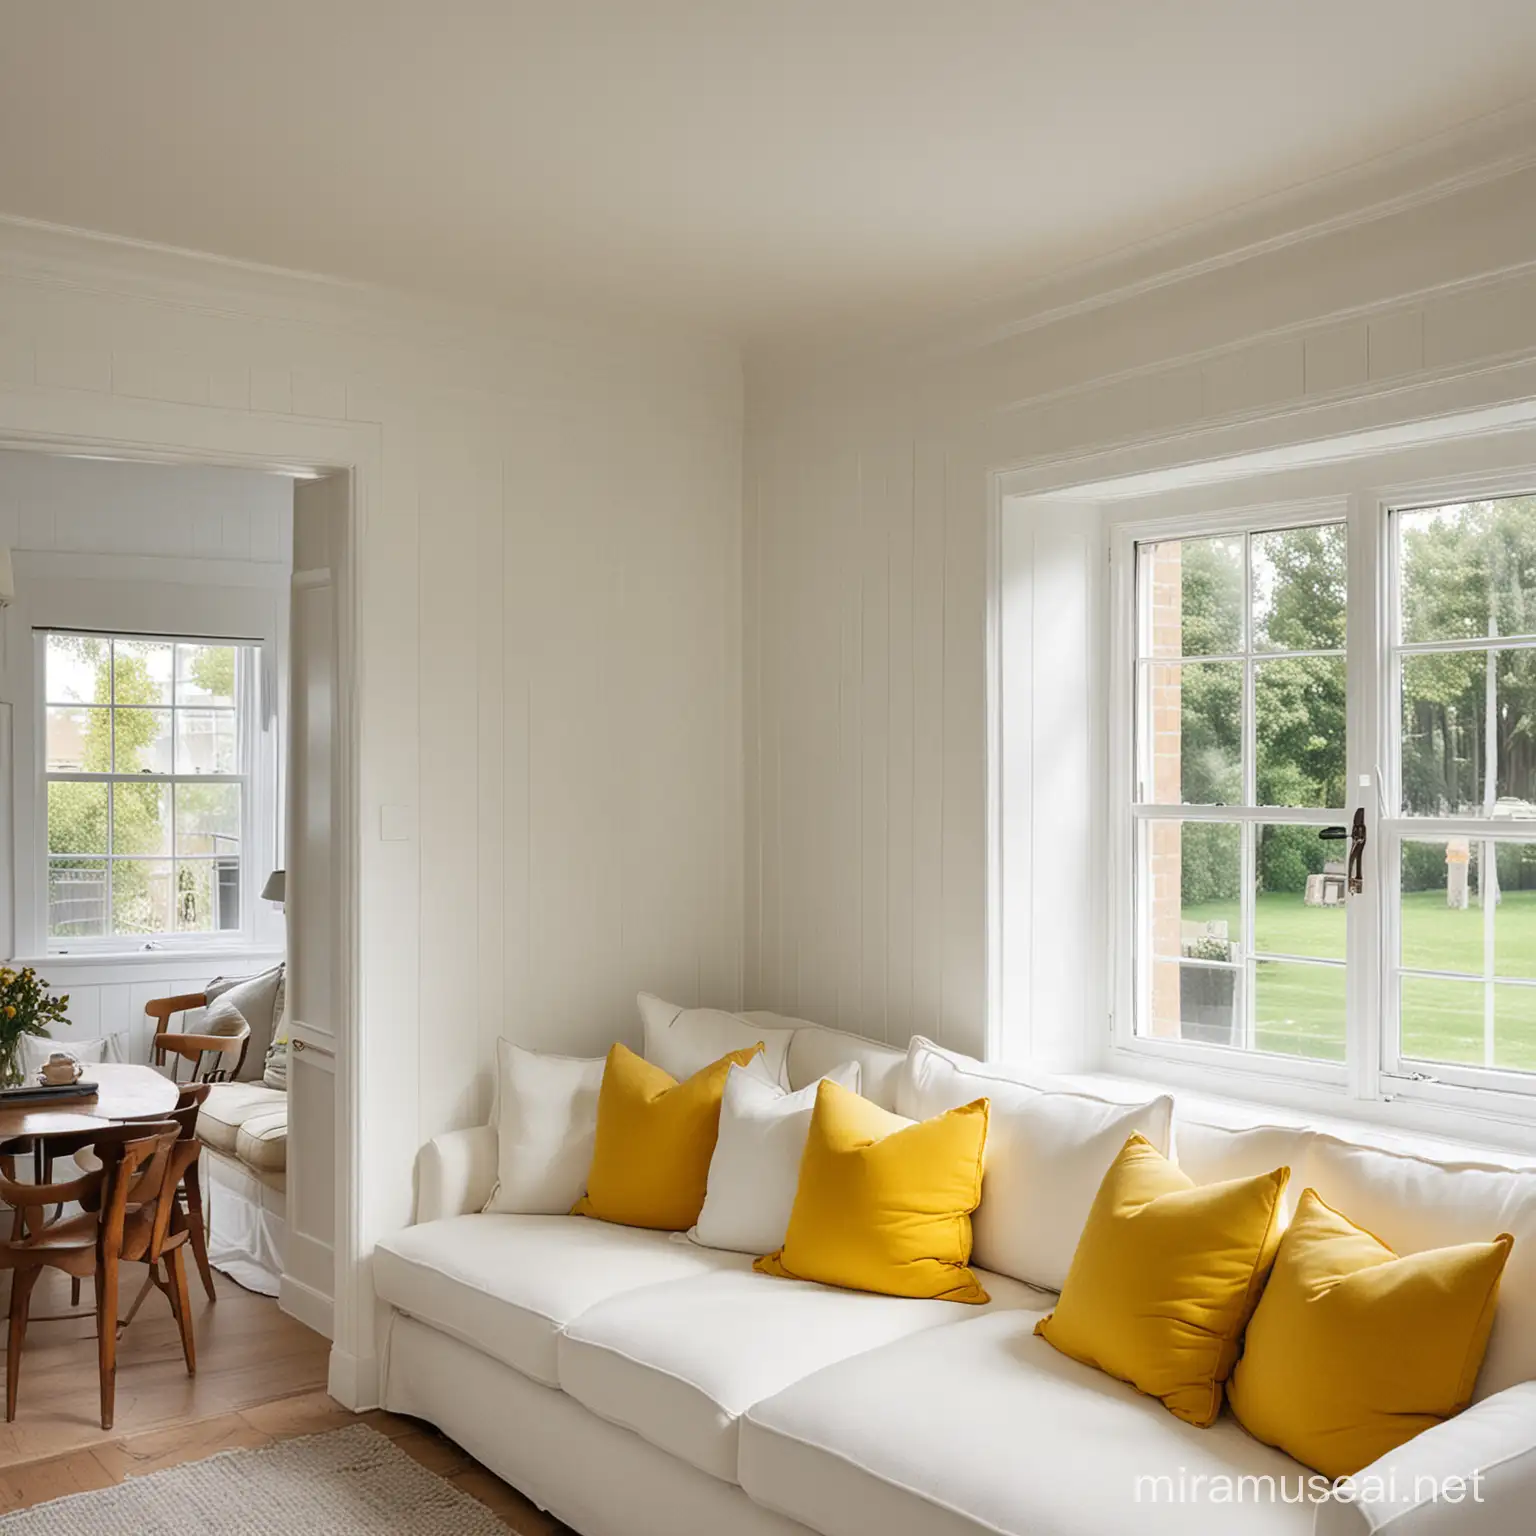 looking into the corner of a living room. large plain white panelled walls. sofa with yellow pillows. window to left.